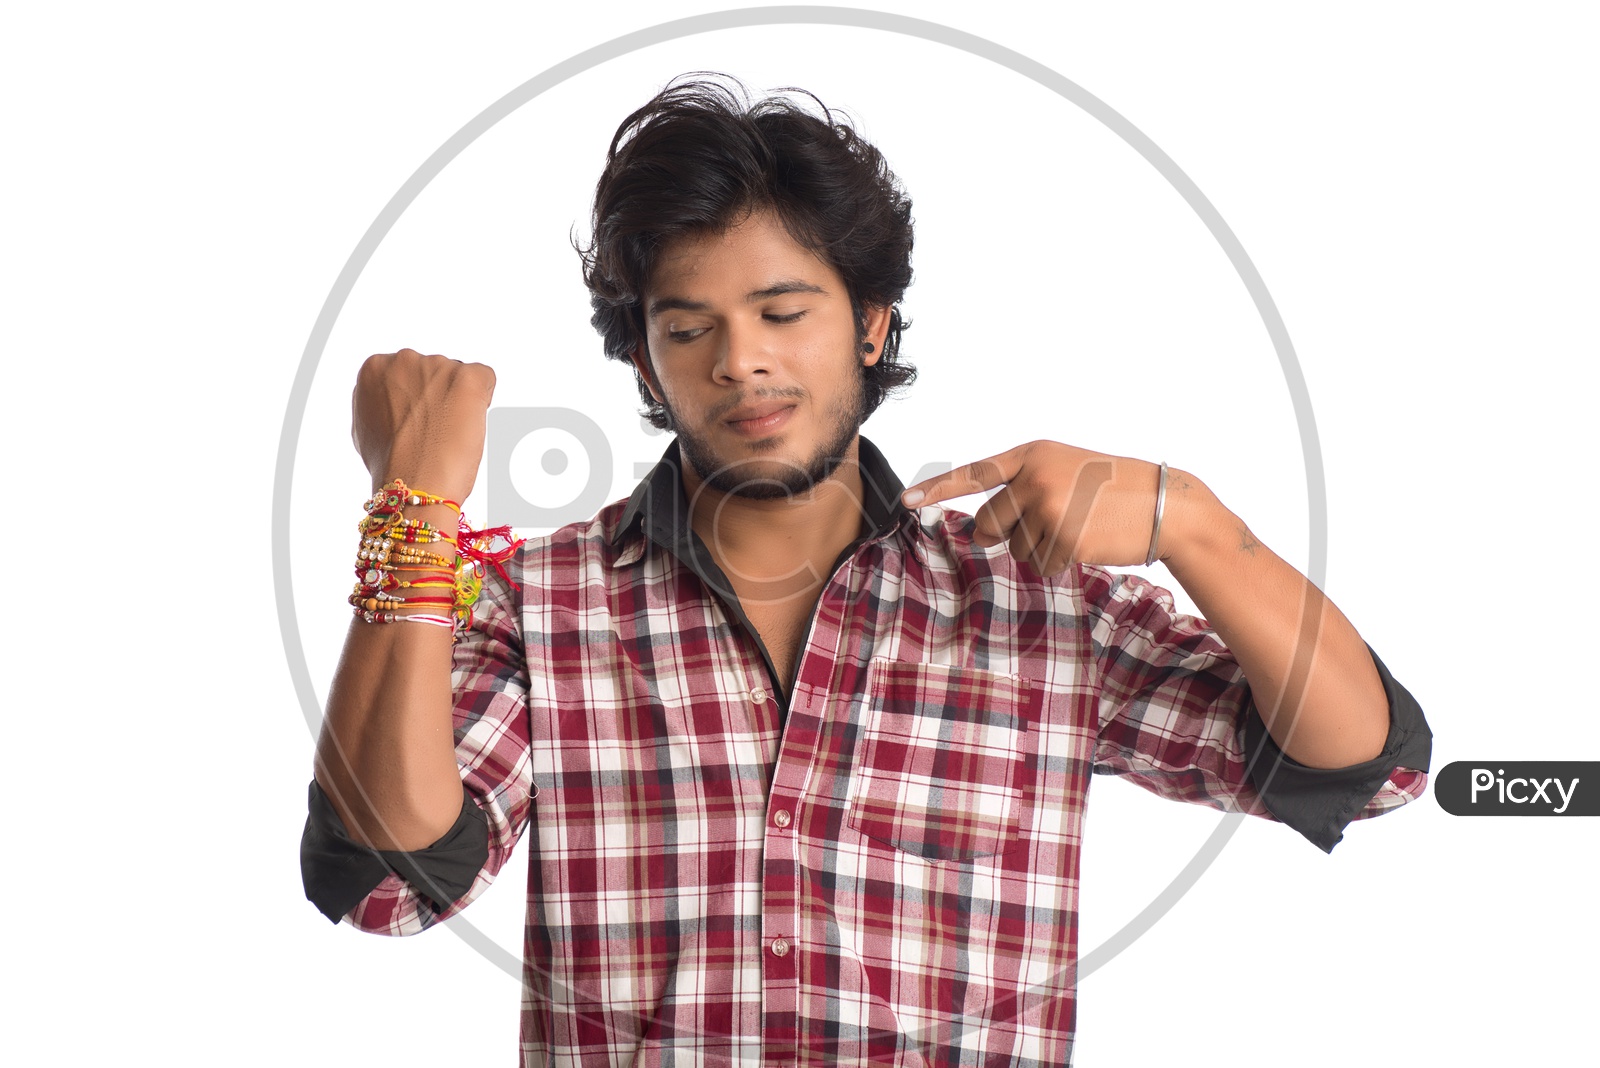 A Young Indian Man With a Elegant Rakhis Tied To His Hand And Posing Over a White Background